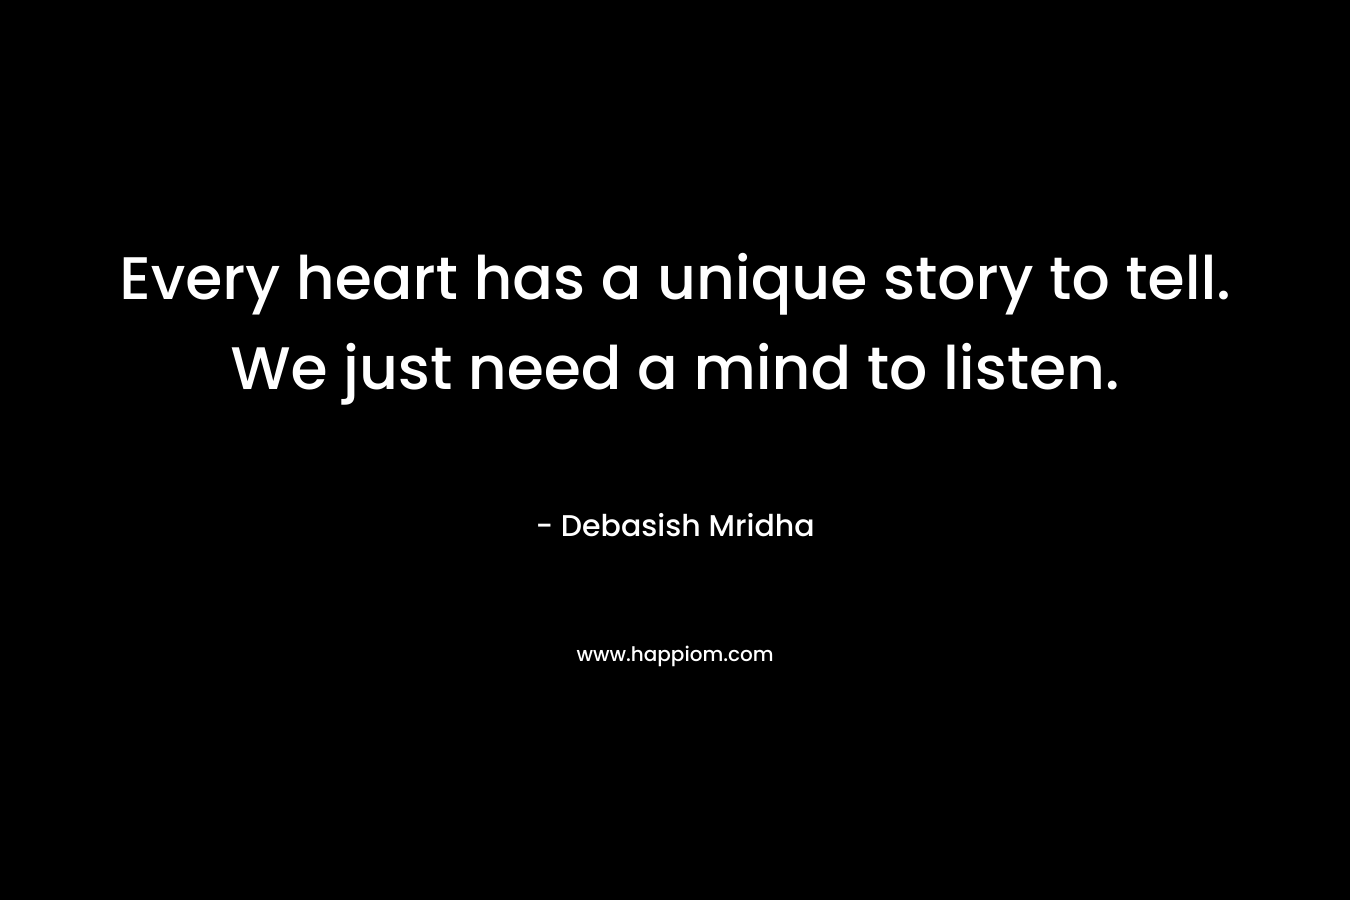 Every heart has a unique story to tell. We just need a mind to listen.